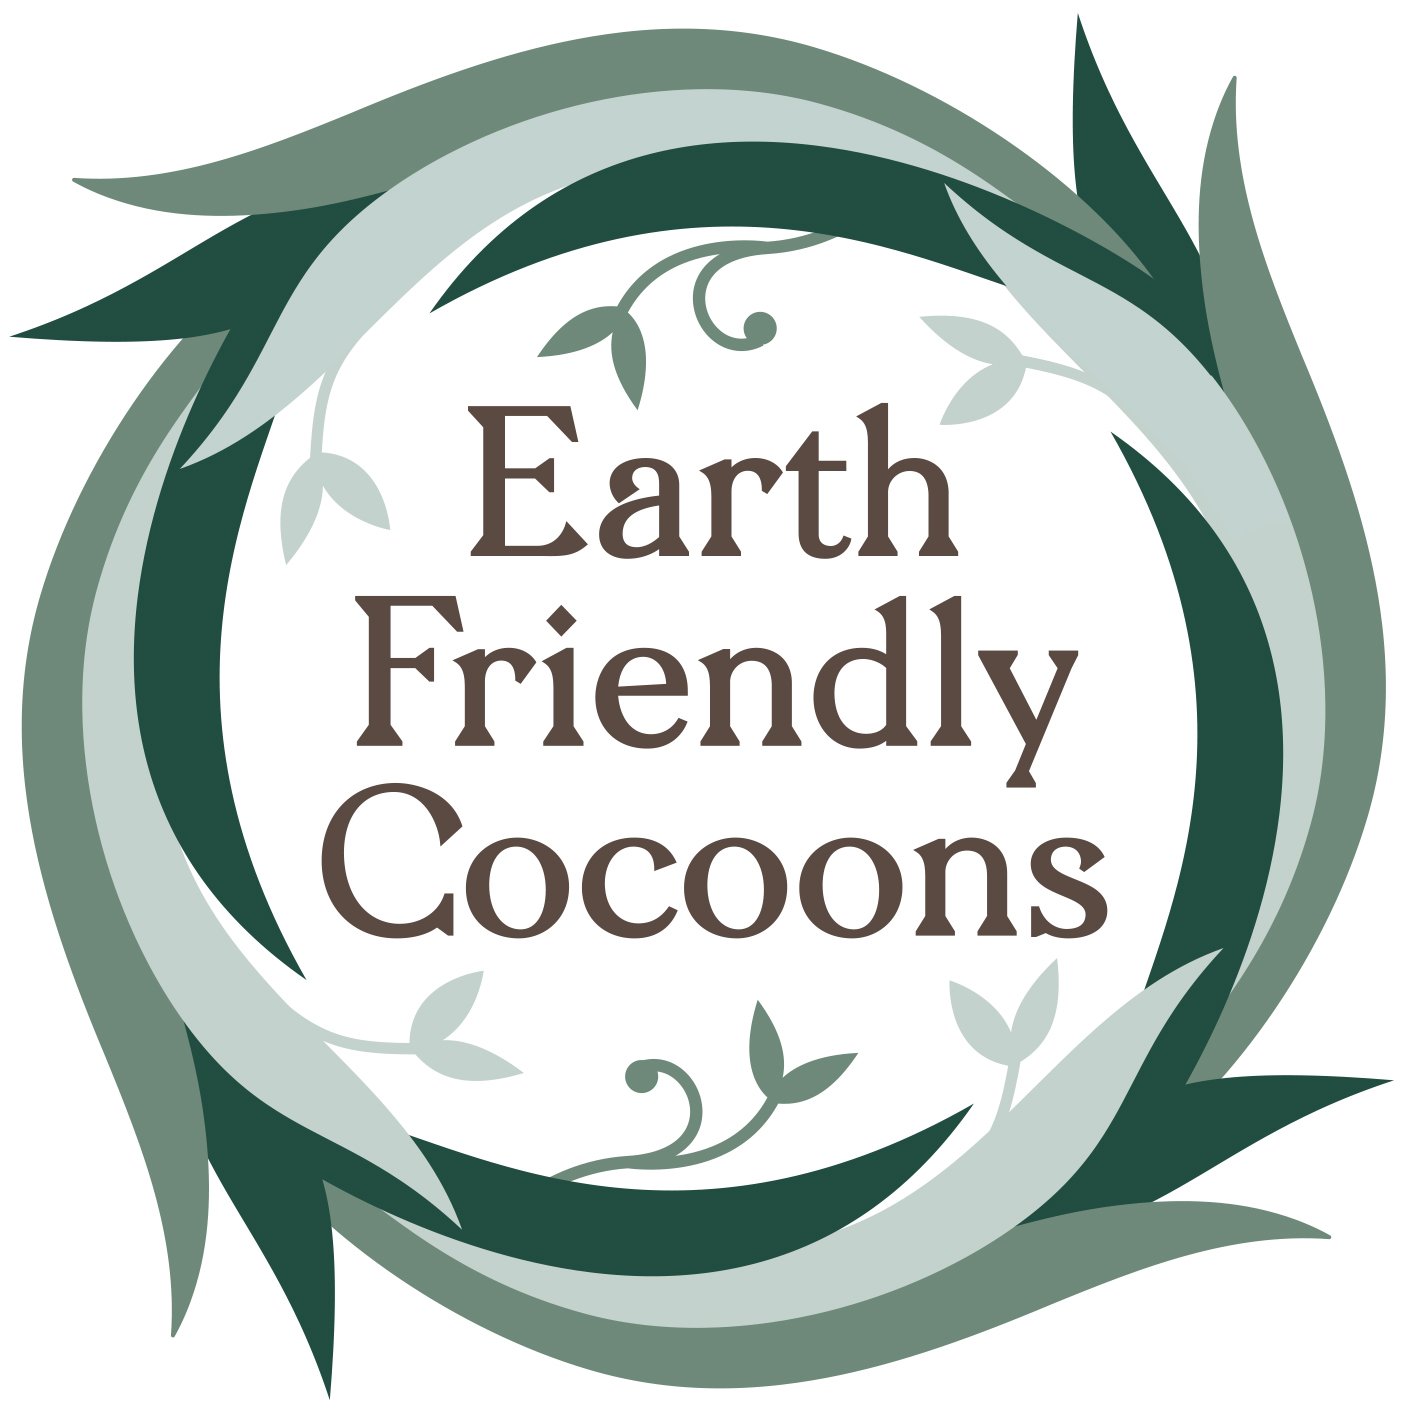 Earth Friendly Cocoons